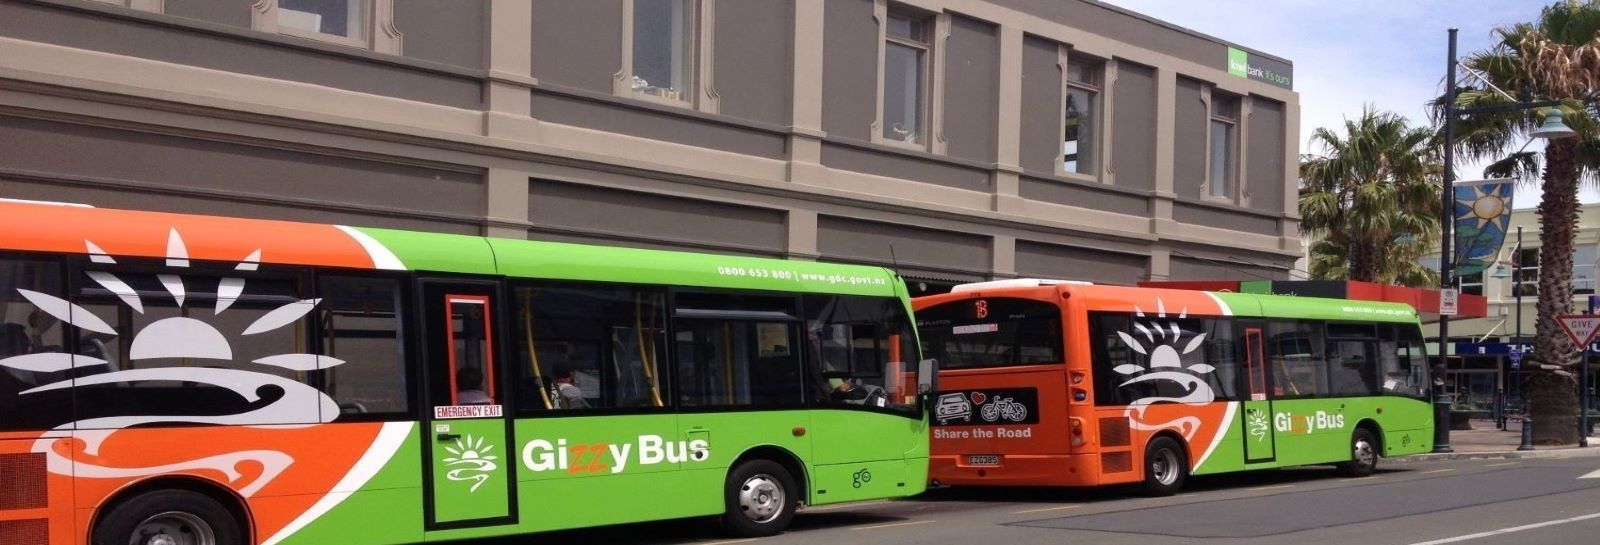 Gizzy Bus banner image